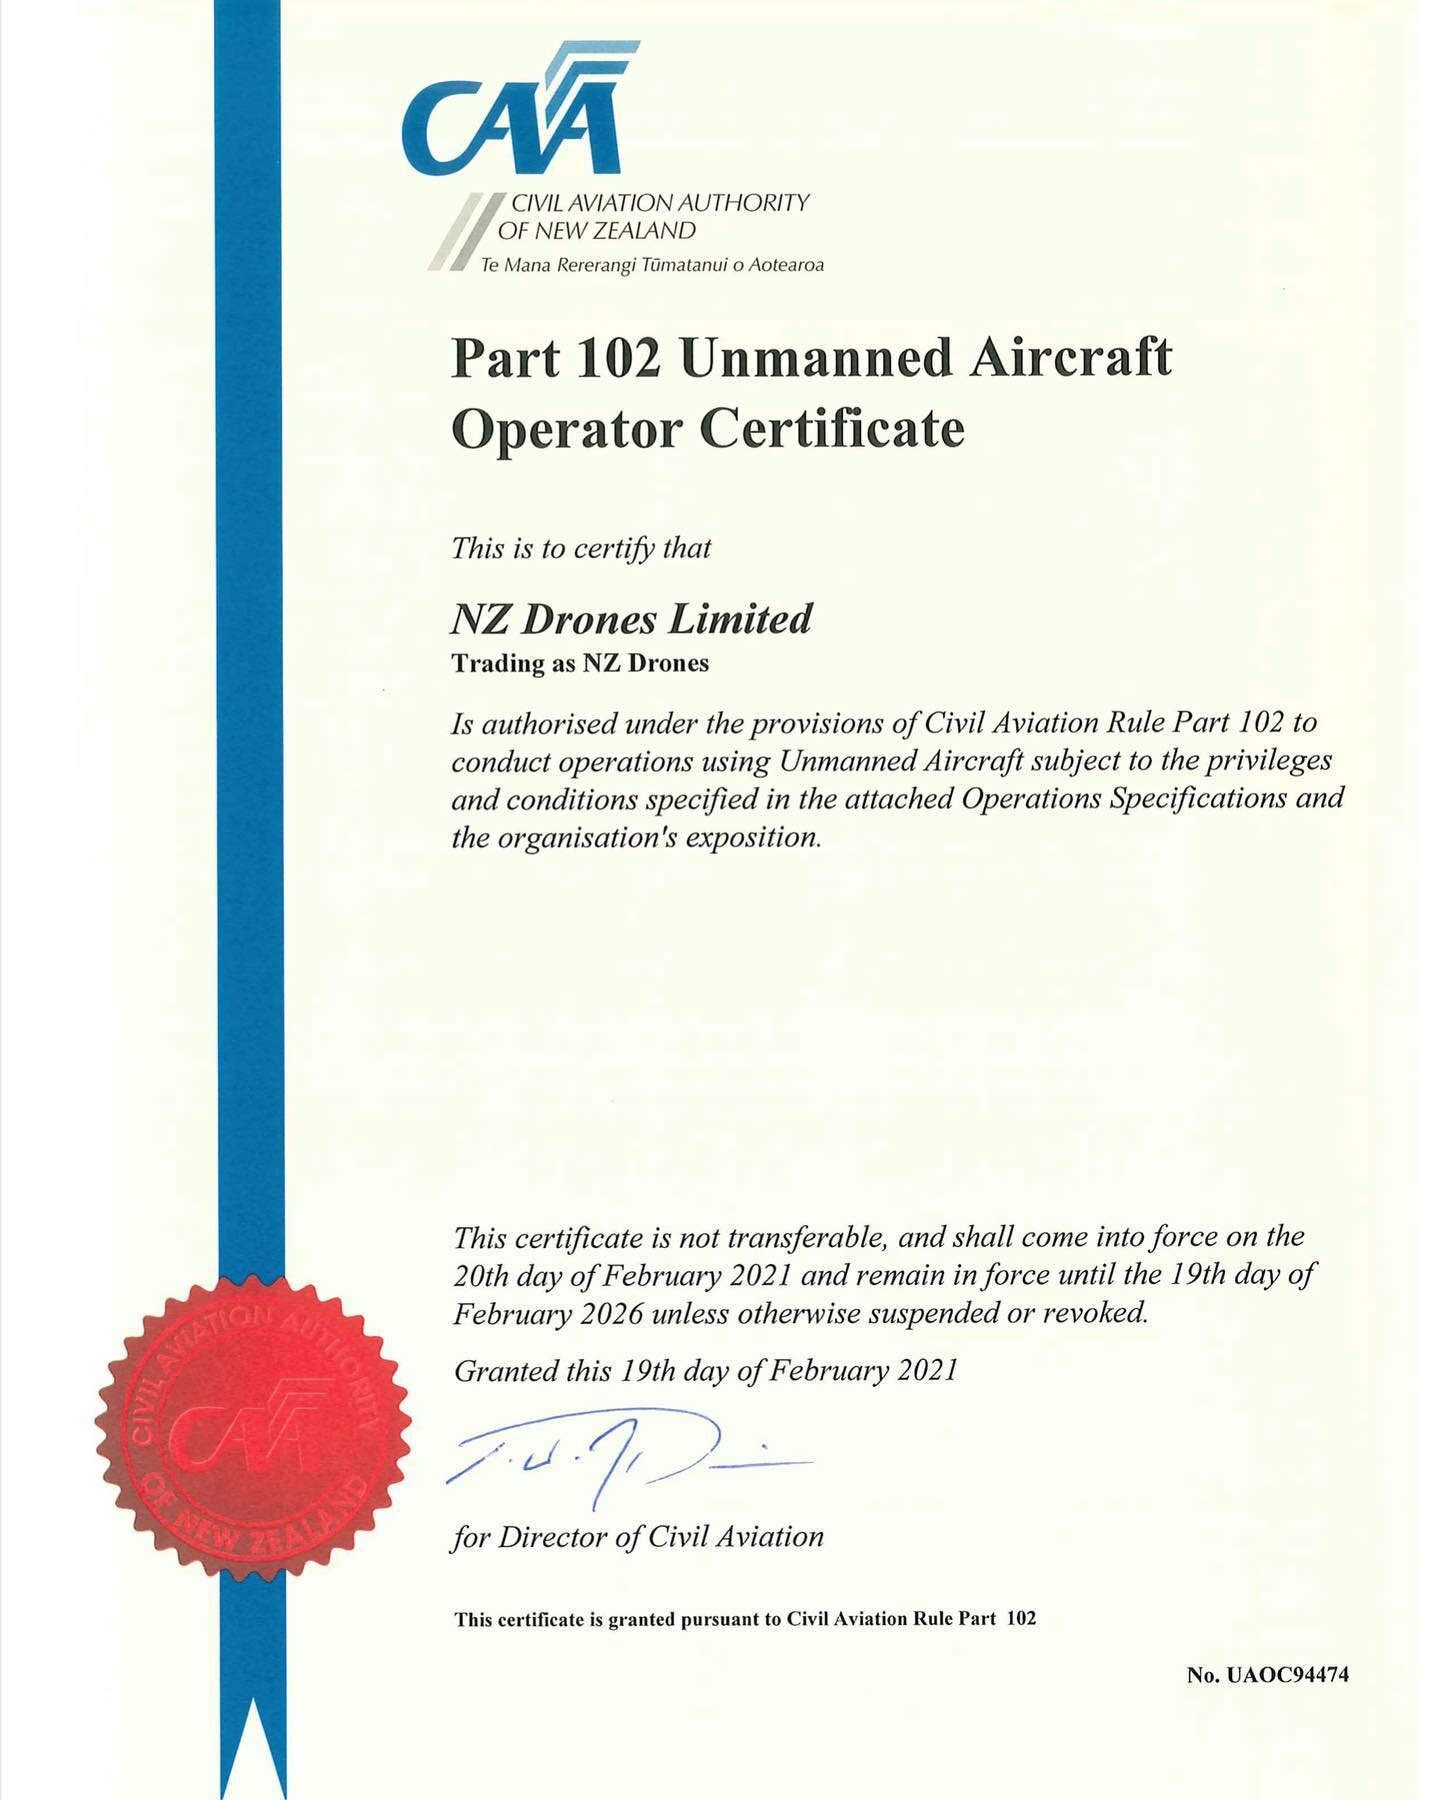 NZ DRONES is pleased to announce that we have completed the recertification/renewal of our Unmanned Aircraft Operators Certificate from the Civil Aviation Of New Zealand ( CAA ) NZ Which has now been extended for the next 5 years 2026.

Congratulatio